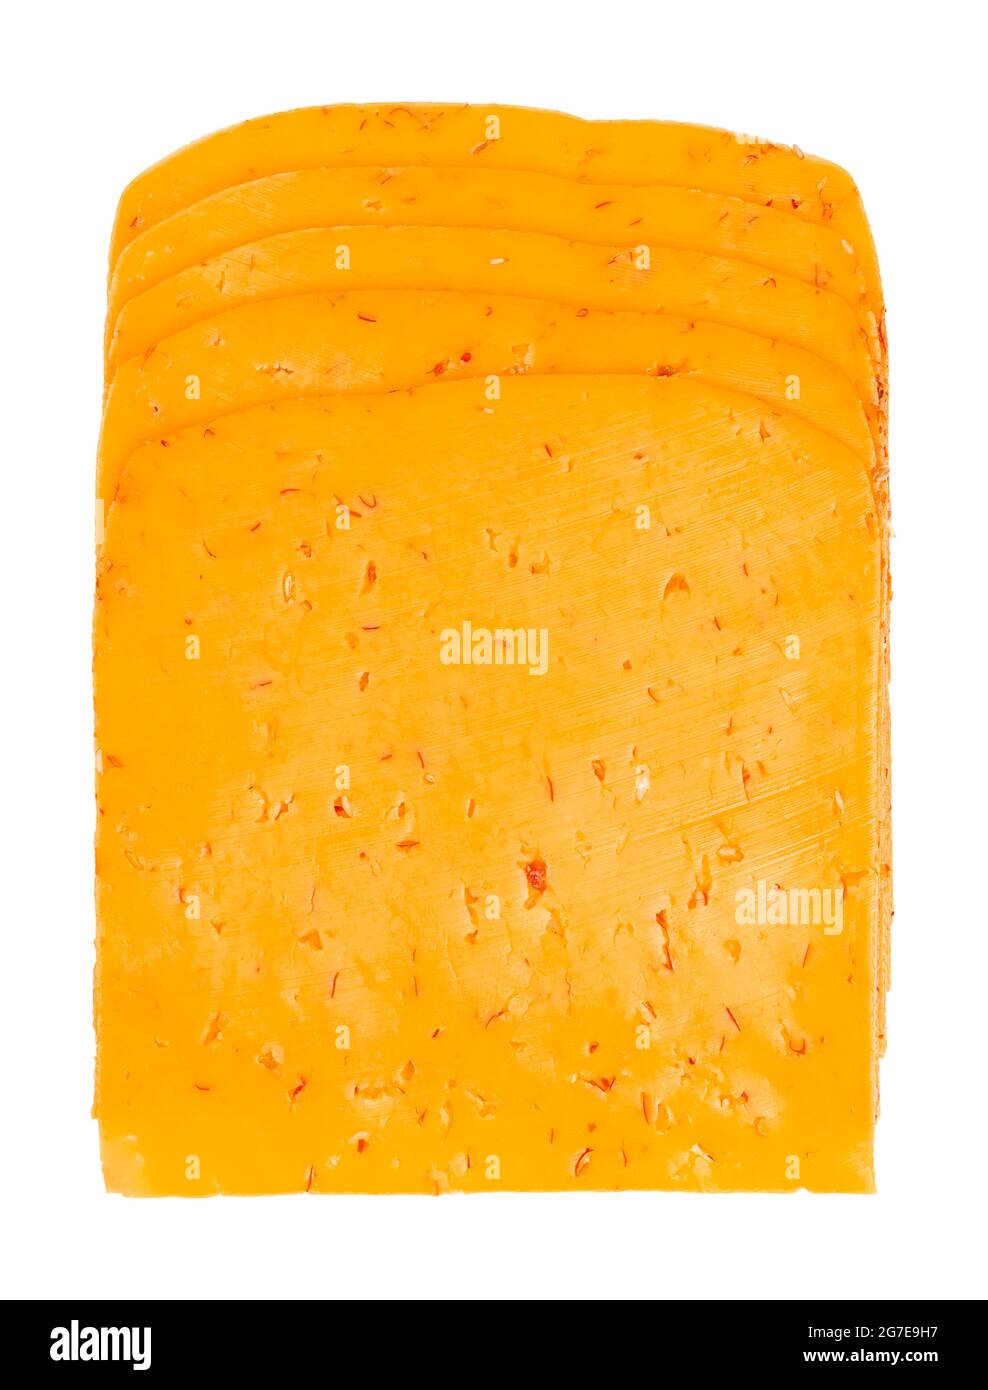 Chili cheese slices. Stack of sliced cheddar for cheeseburgers, made of pasteurized milk and flakes of red chilies. Dairy product. Orange color. Stock Photo